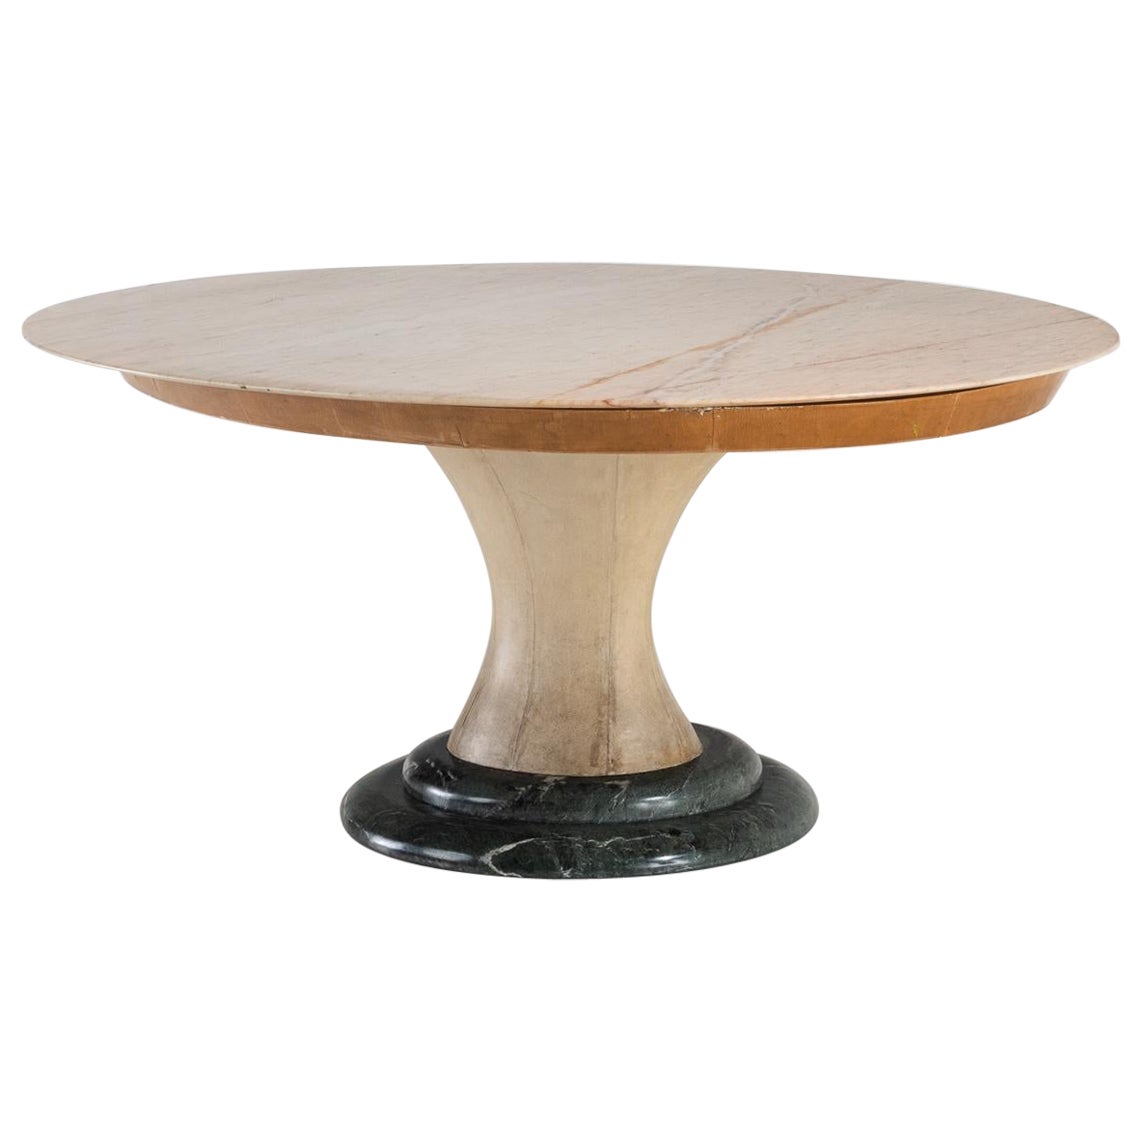 Guglielmo Ulrich Parchemin table with marble top. Italian design 1940s